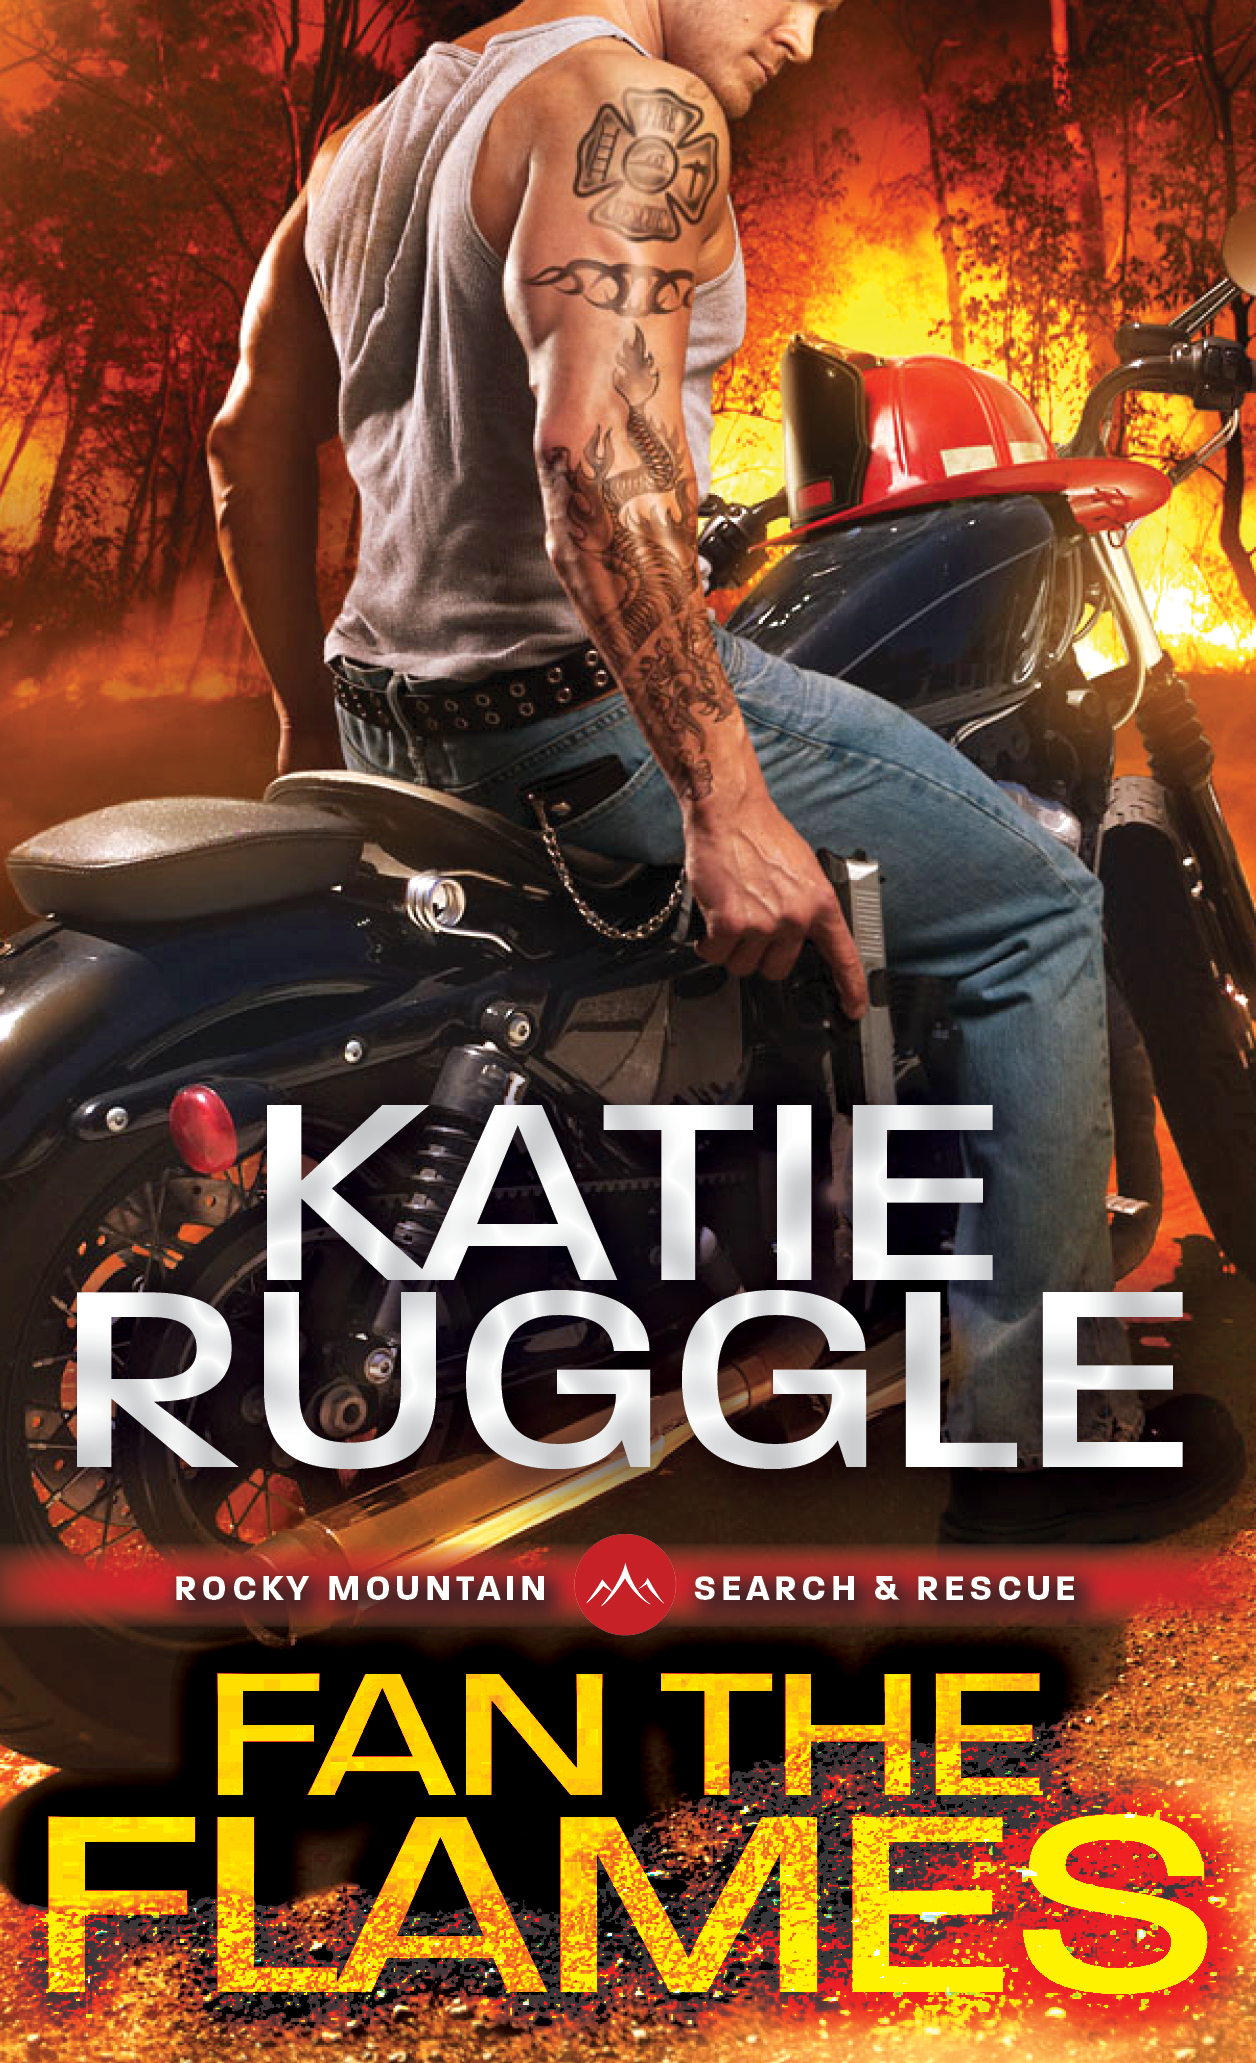 Fan the Flames by Katie Ruggle